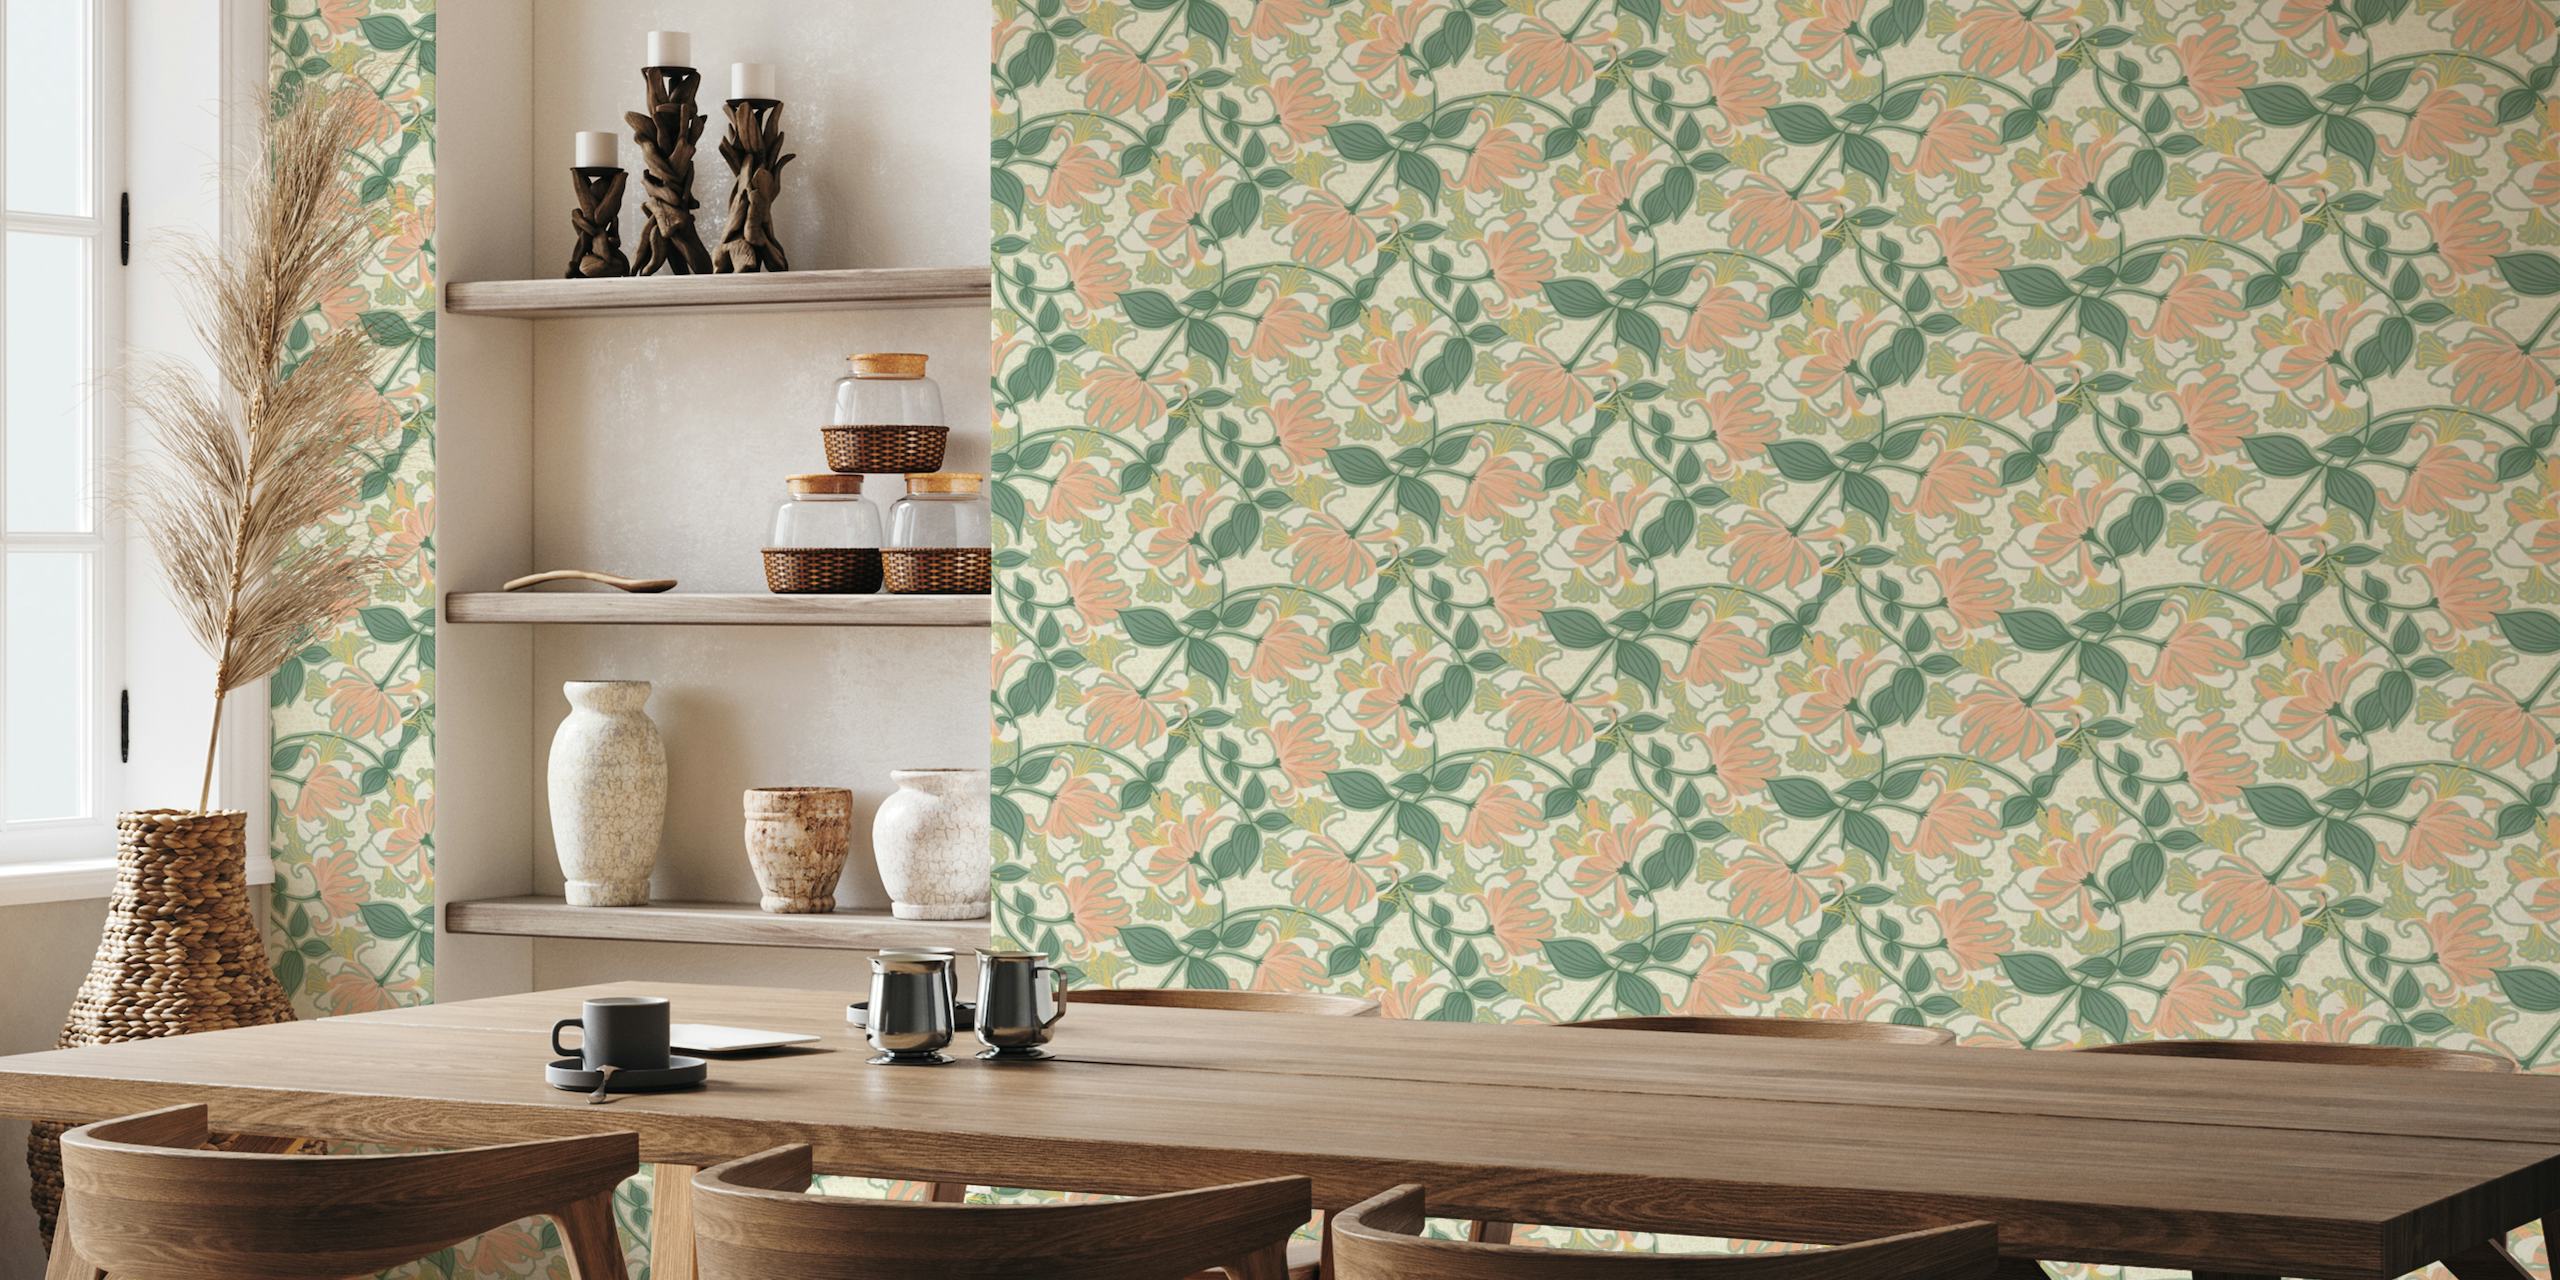 Peaches and Cream Honeysuckle Trailing Floral wallpaper